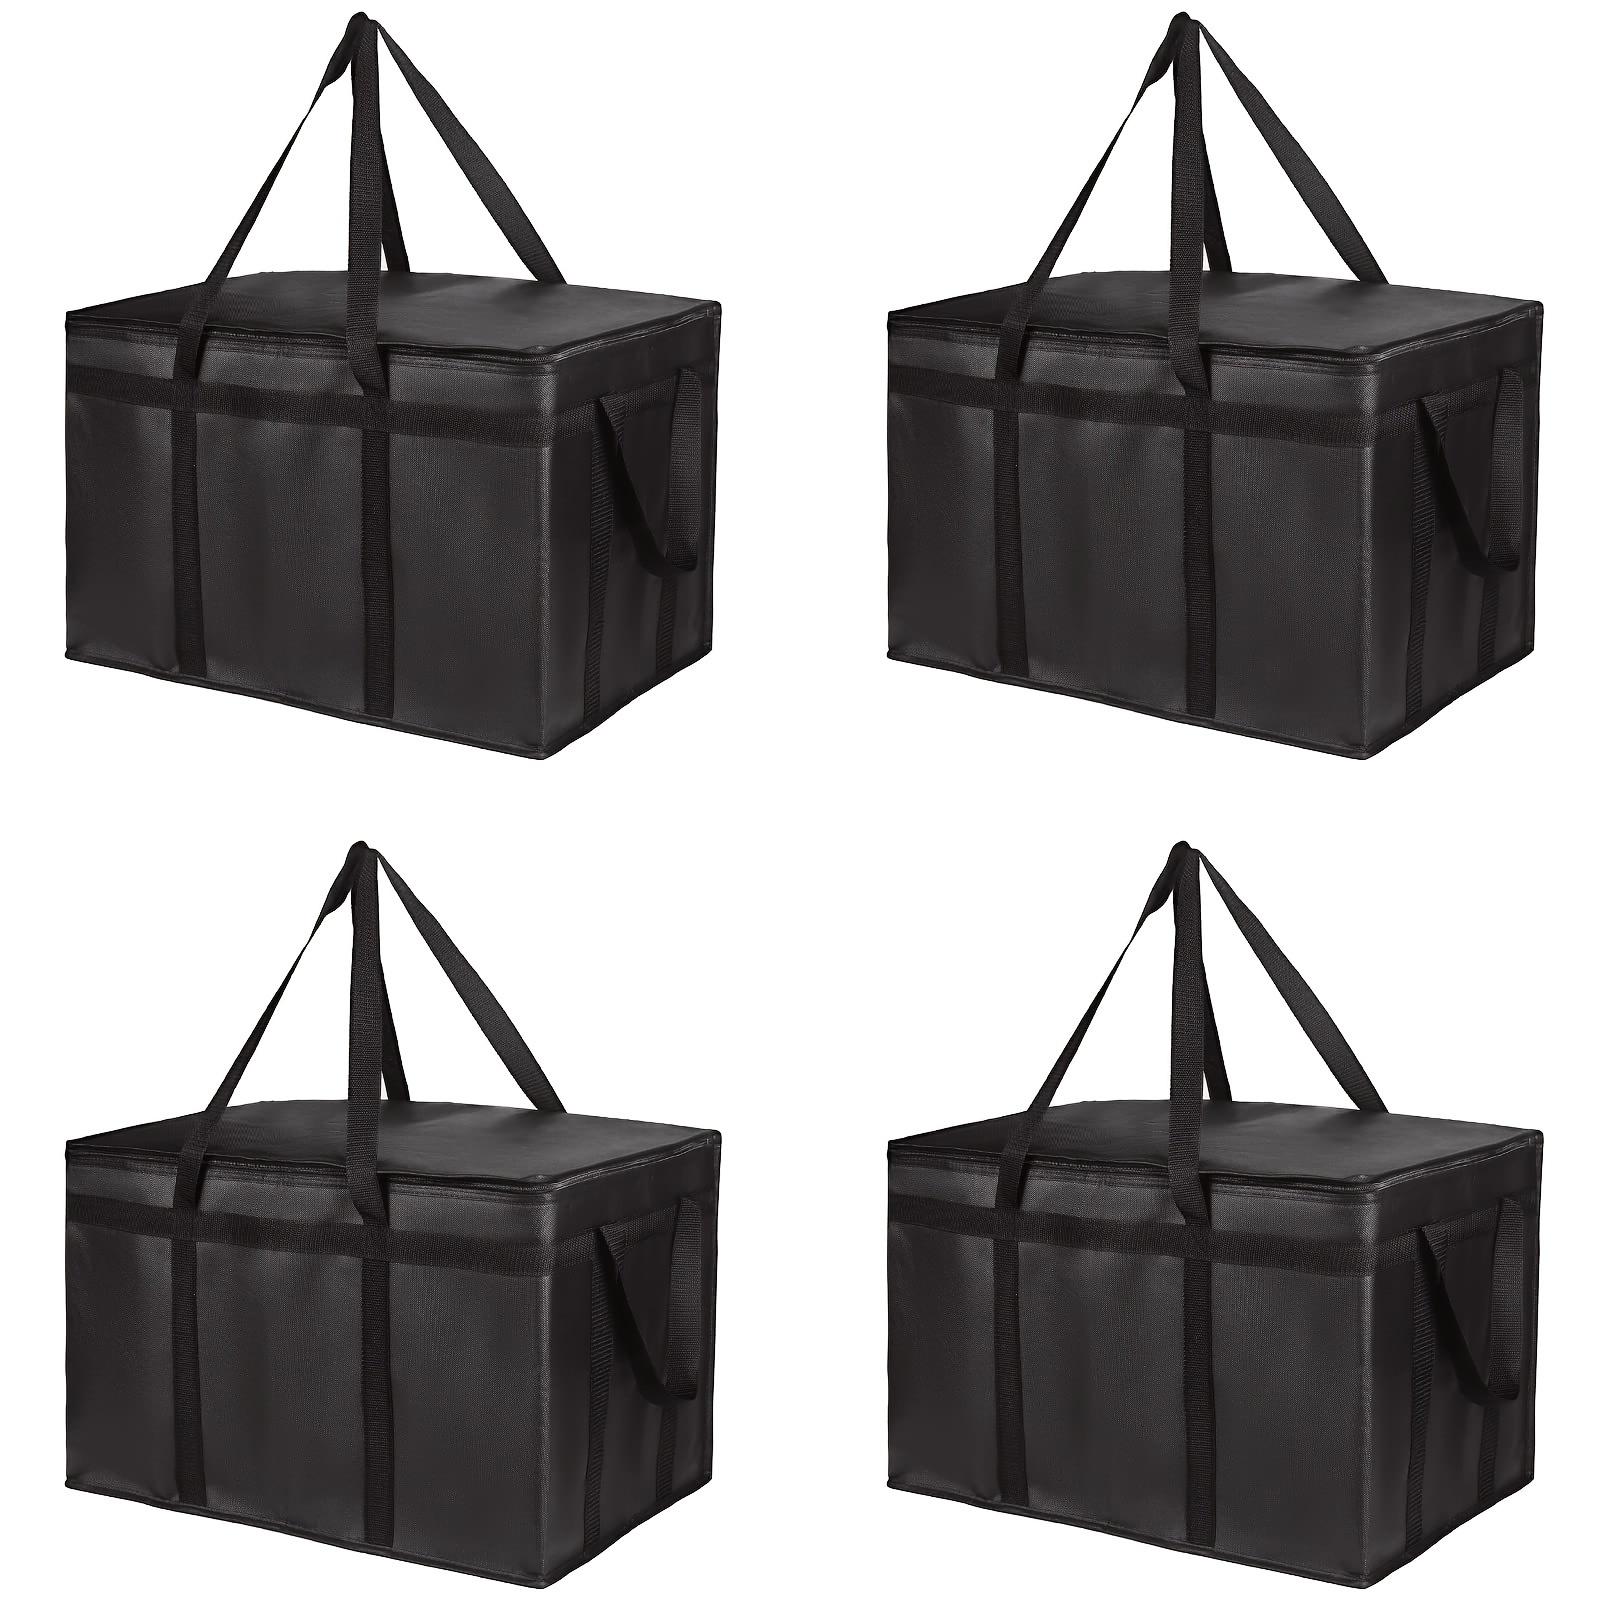 

4-pack Insulated Food Delivery Bag, Xxx-large Meal Grocery Tote Insulation Bag For Hot And Cold Food, Commercial, Large Capacity Reusable Warming Bag, Black